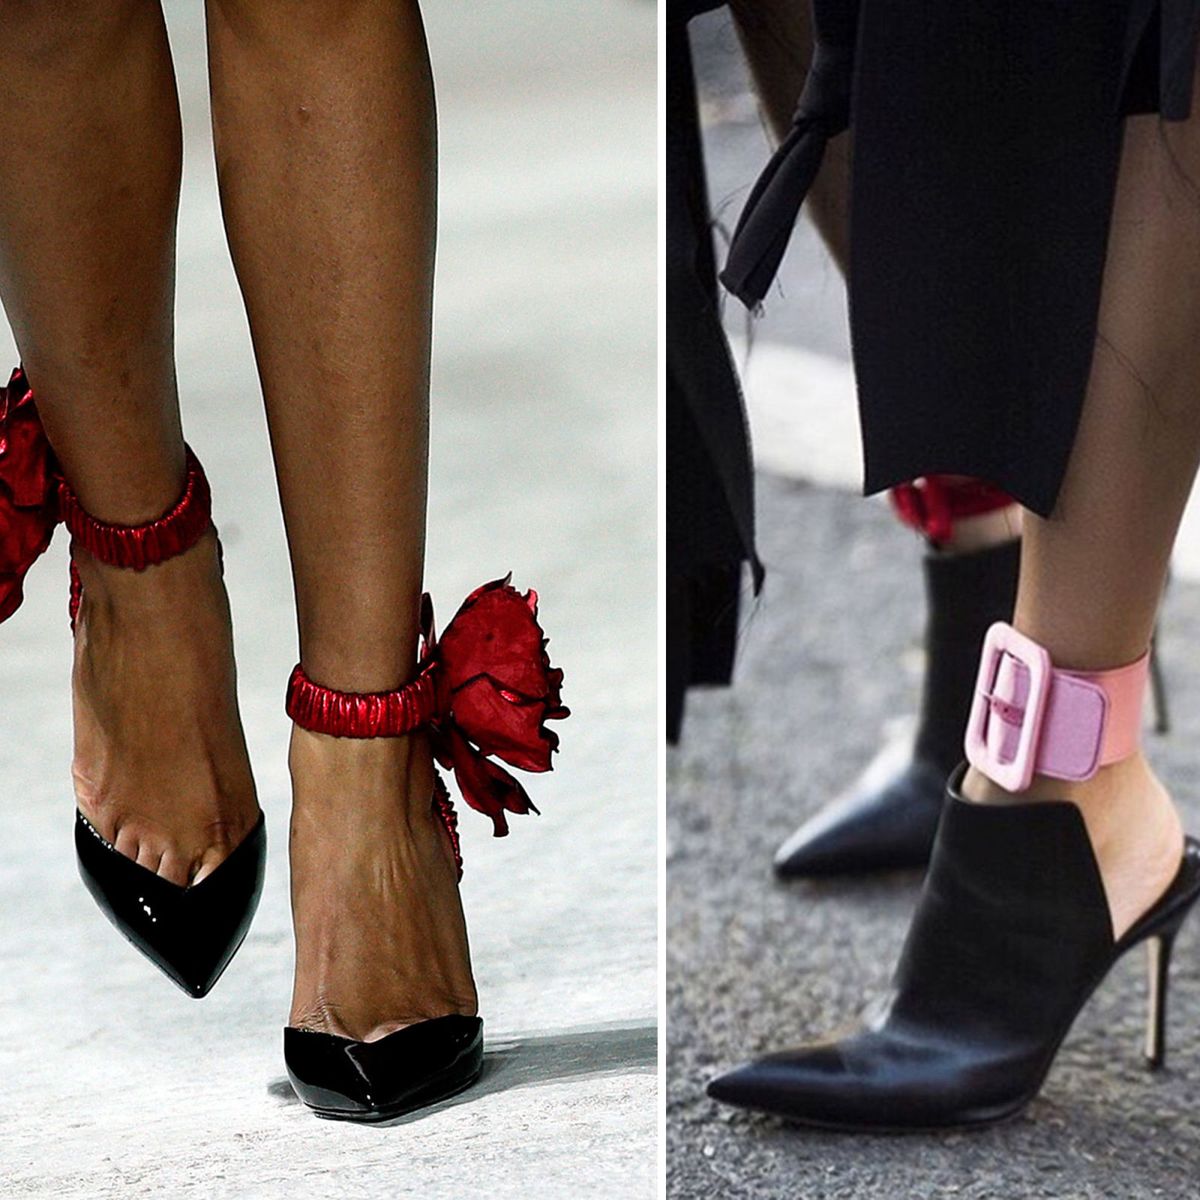 Ankle cuffs – where to buy and how to wear them